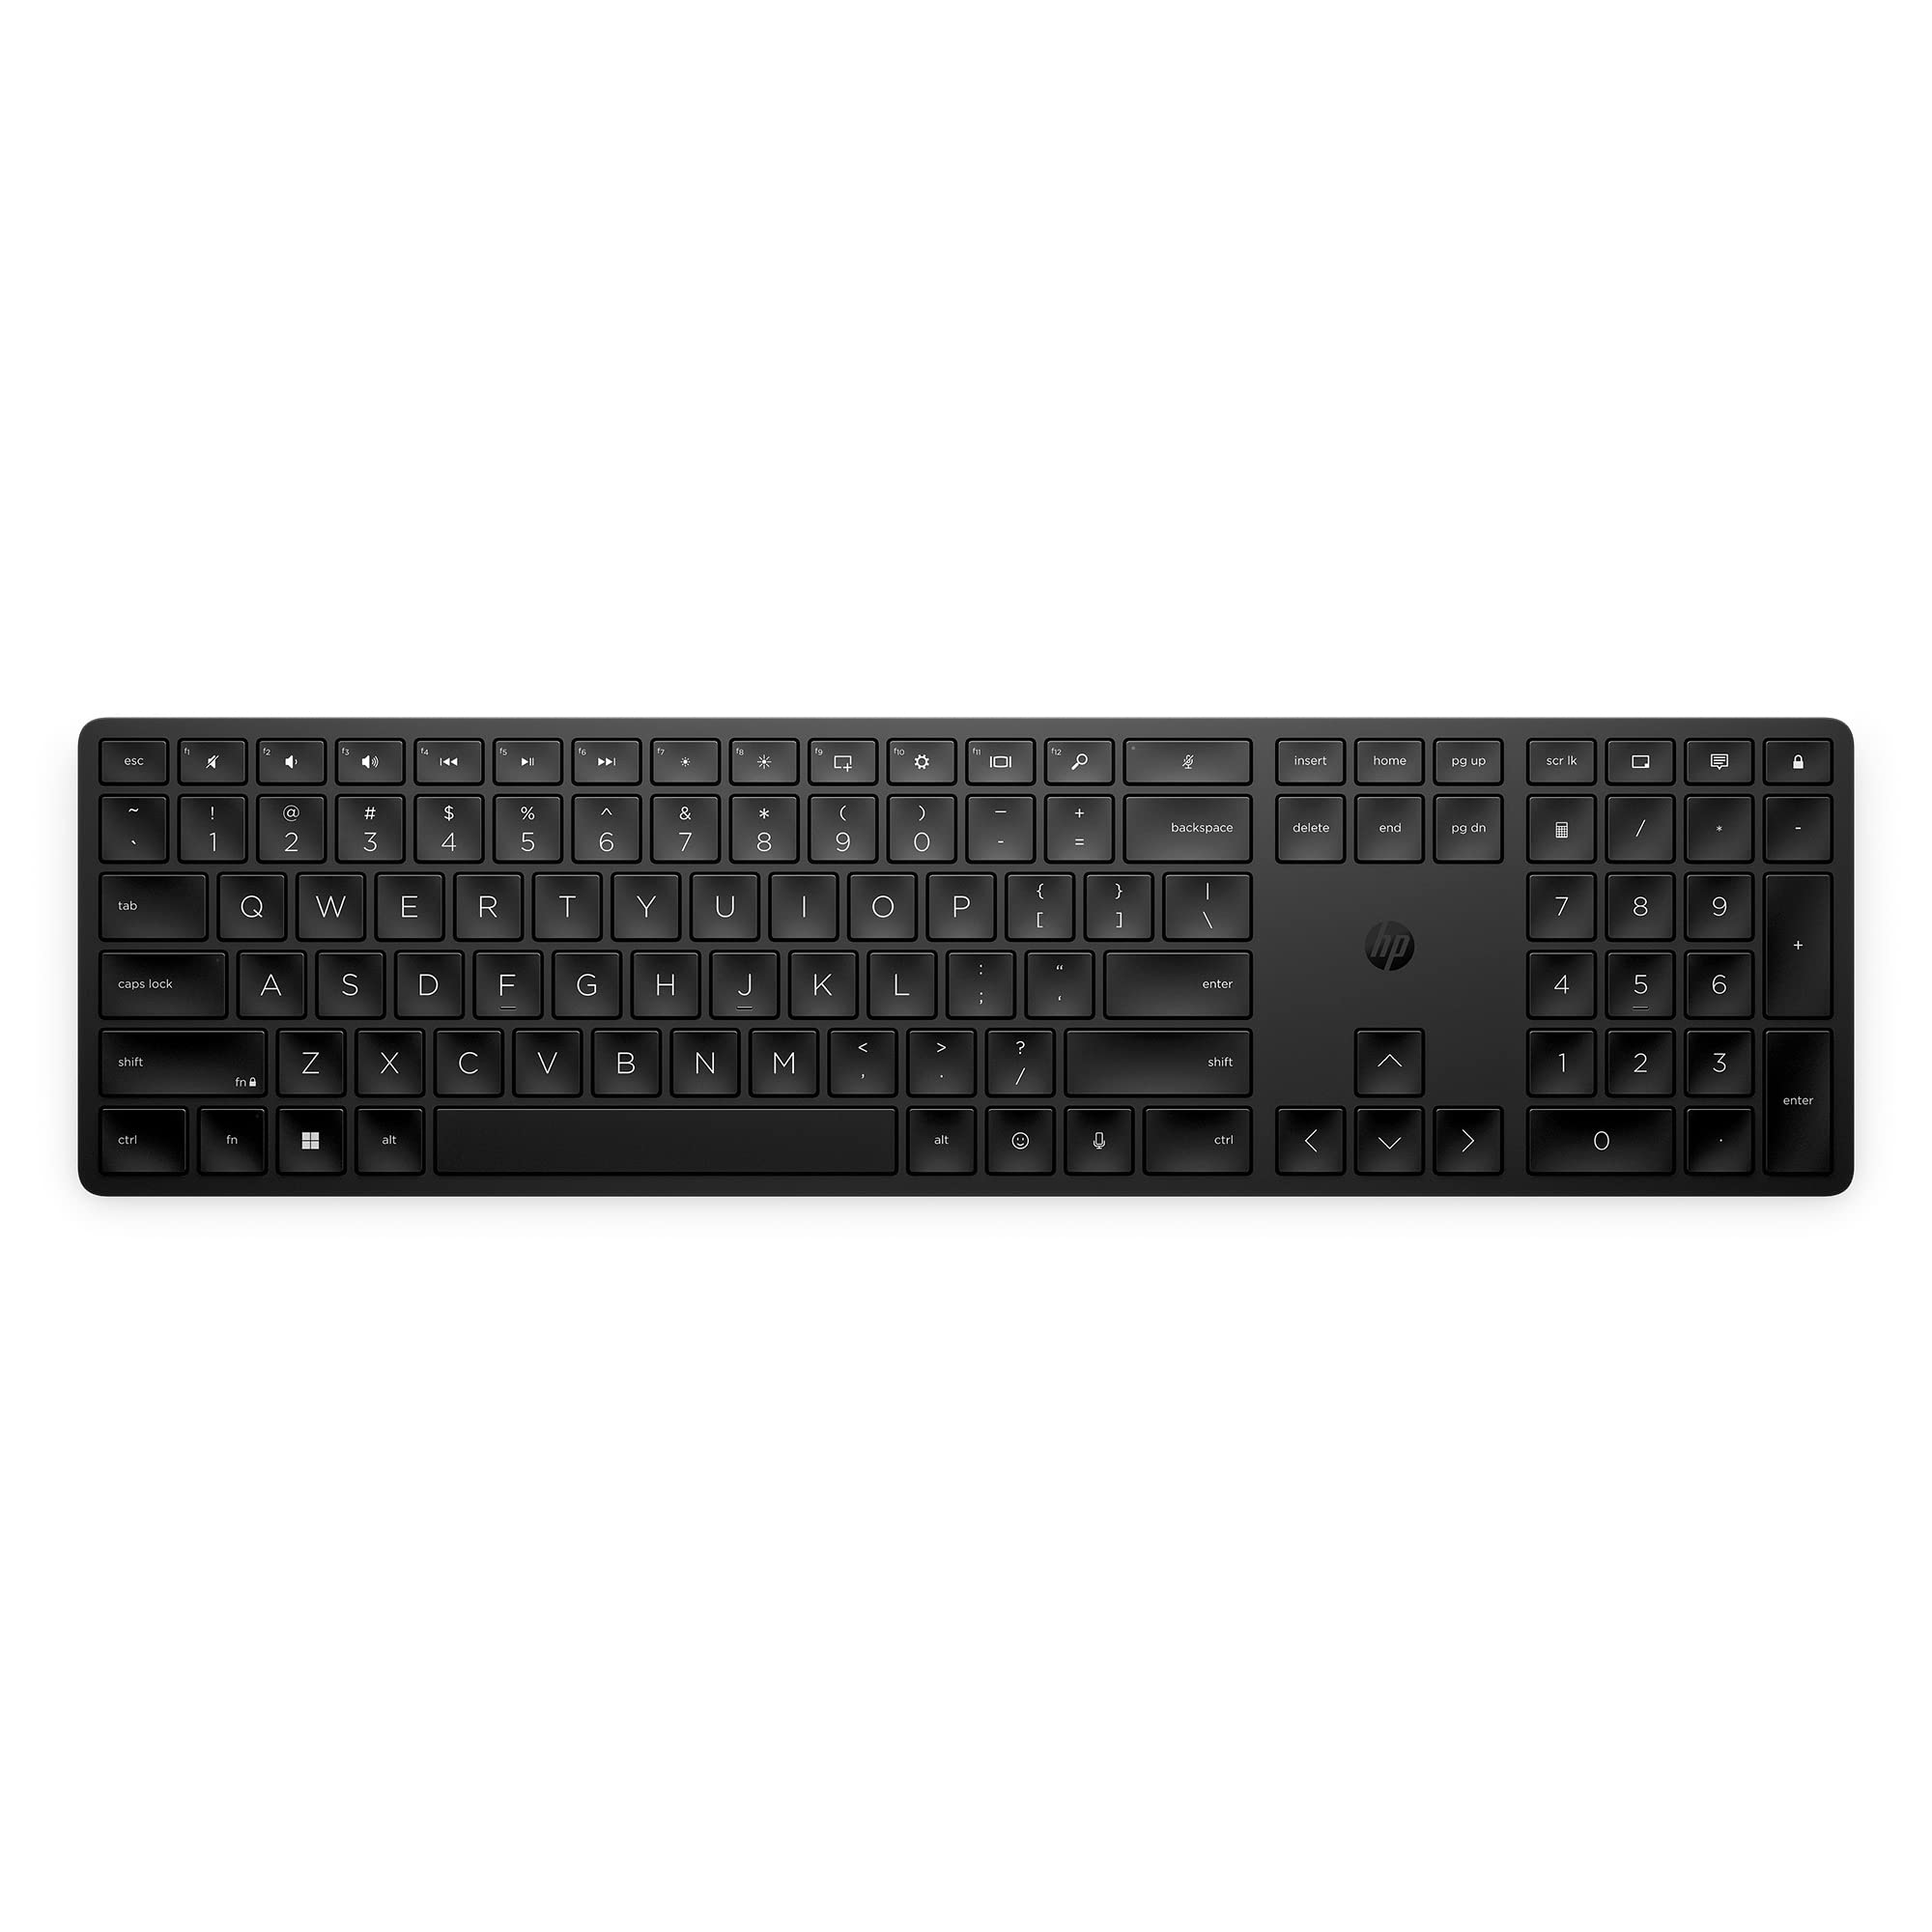 HP 450 Programmable Wireless Keyboard - Slim, Ergonomic Design w/Number Pad - Wireless USB - 20 Programmable Keys, 4 LEDs, Chiclet Keys - Up to 2-Year Battery Life - Win, Chrome, MacOS (‎4R184AA#ABL)